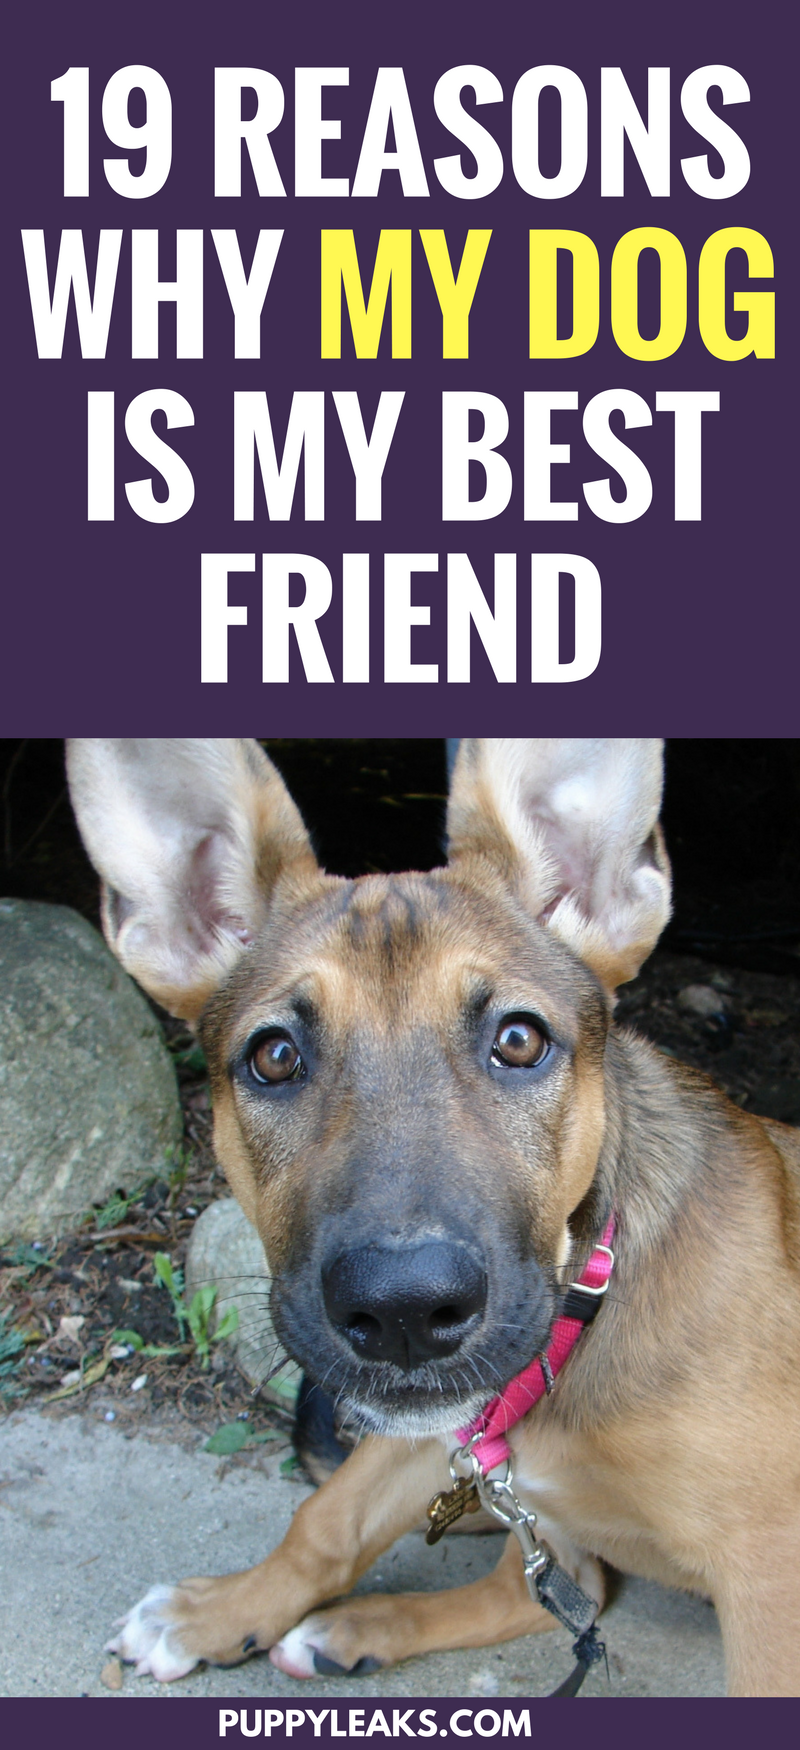 19 Reasons Why My Dog Is My Best Friend